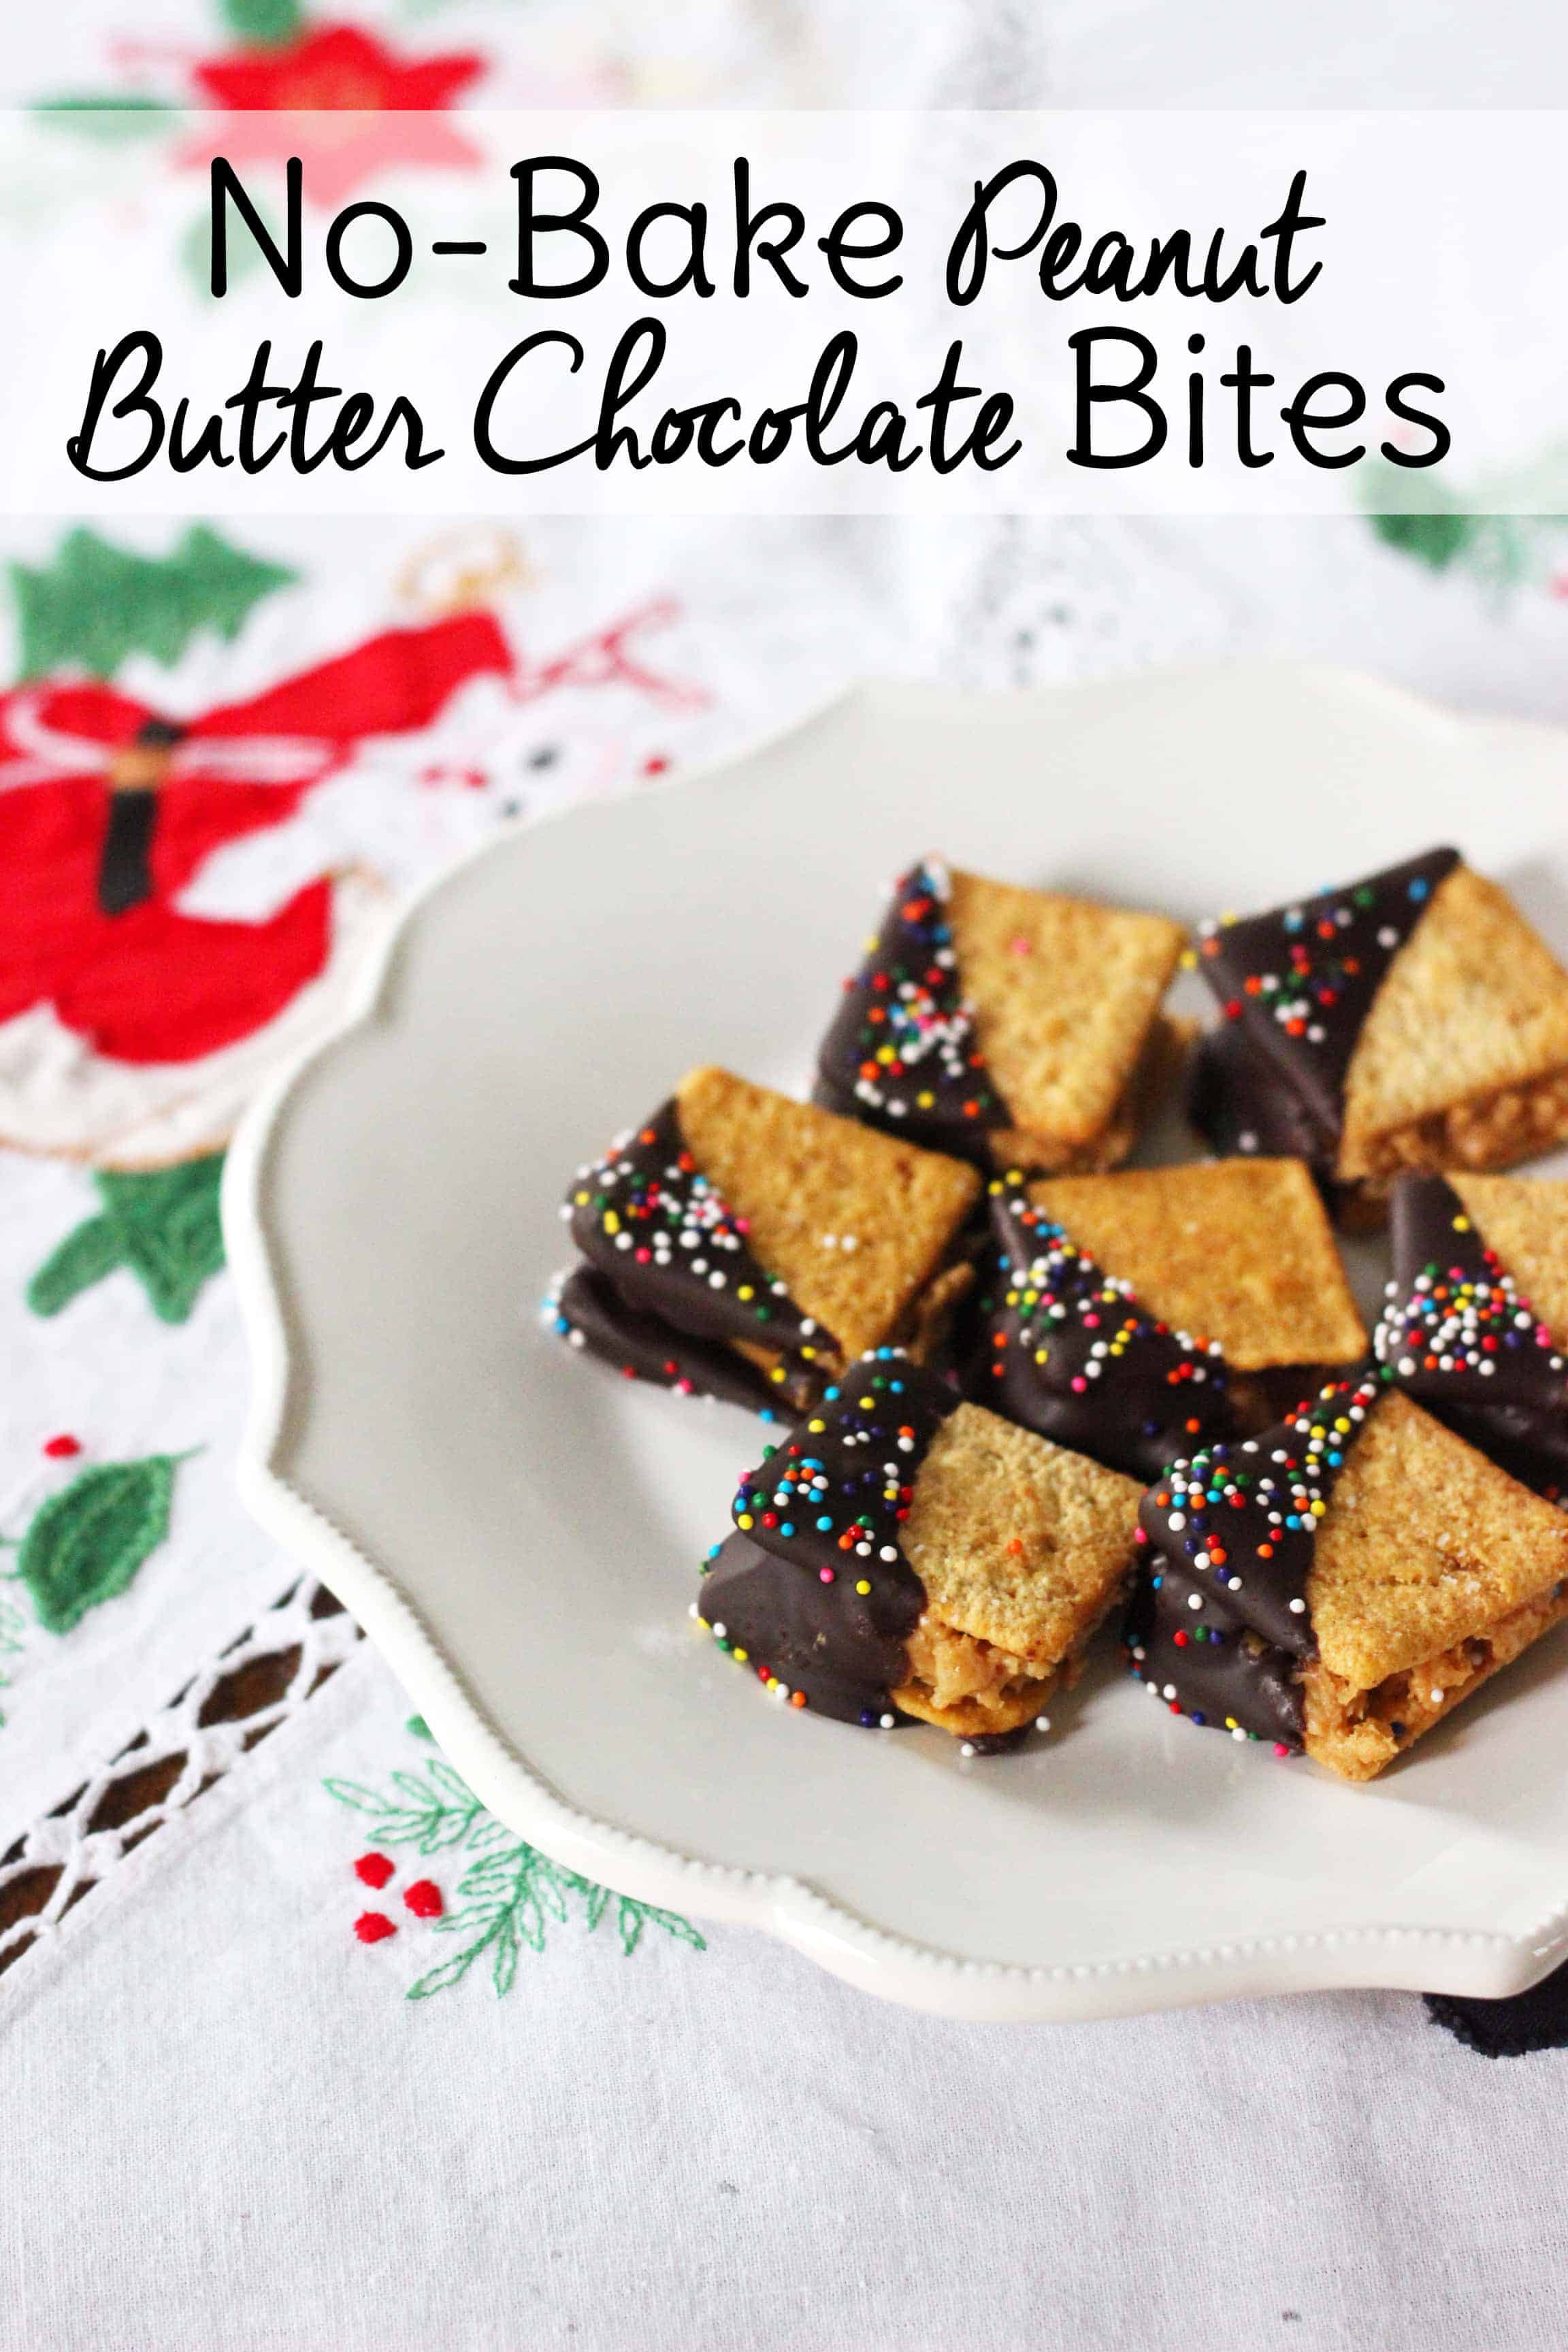 Easy To Make Christmas Desserts
 Easy Desserts to Make for Christmas with Wheat Thins